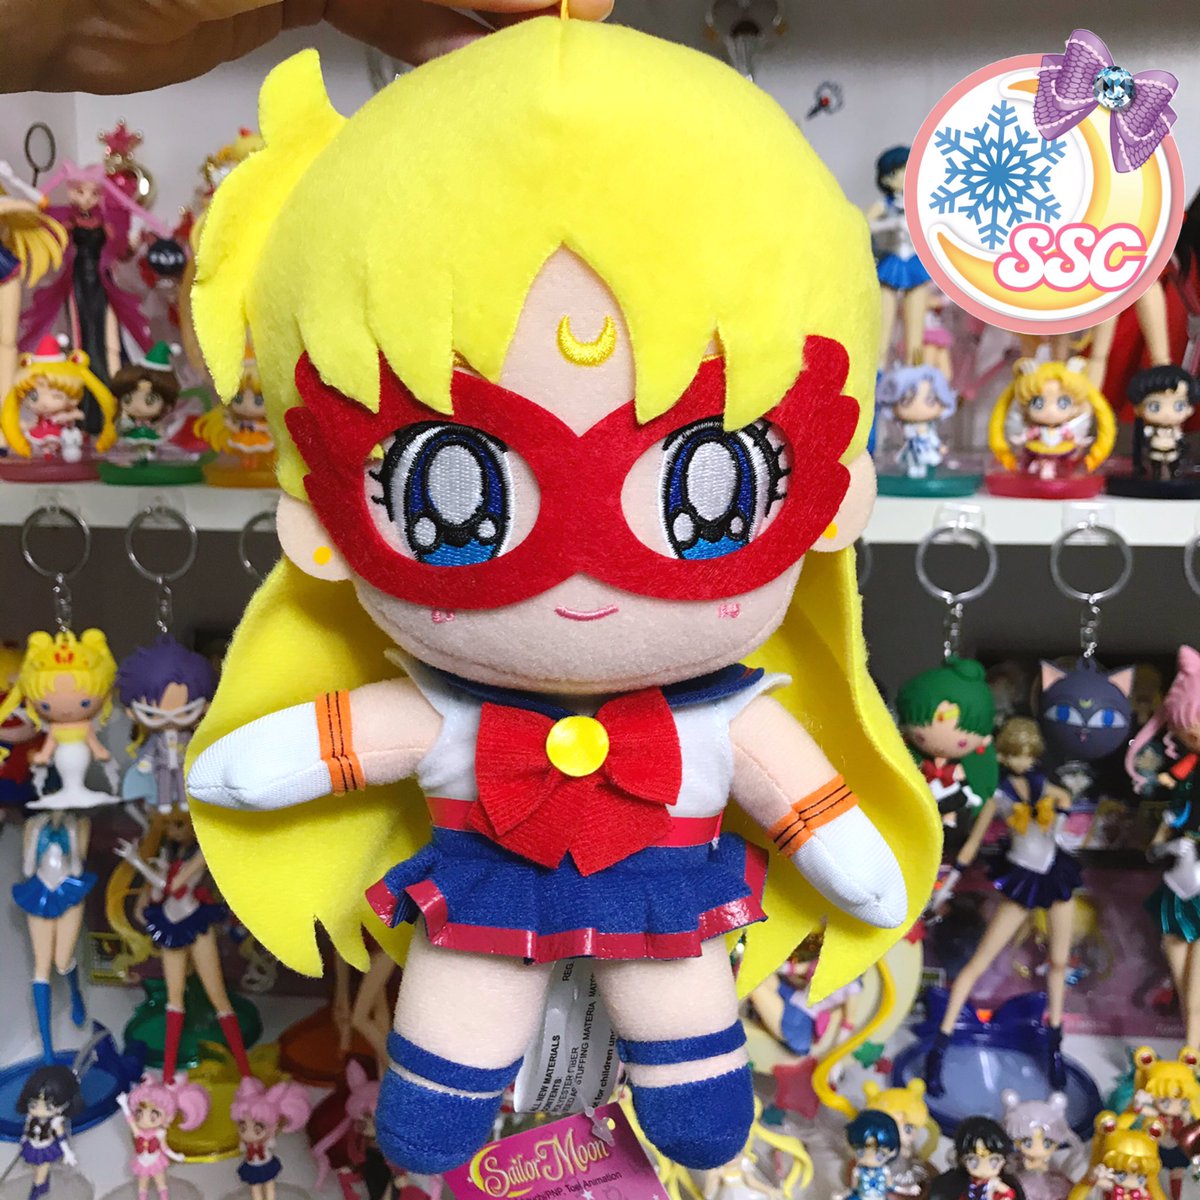 Huge thanks to my bestie @Moonie_Sophi for grabbing me one of these Sailor V plush. These are too adorable, the attention to detail is perfect! 💗
Get one now in my Amazon store: amazon.com/shop/sailorsam…
🌙
#SailorMoon #セーラームーン #toeianimation #geanimation #sailorv